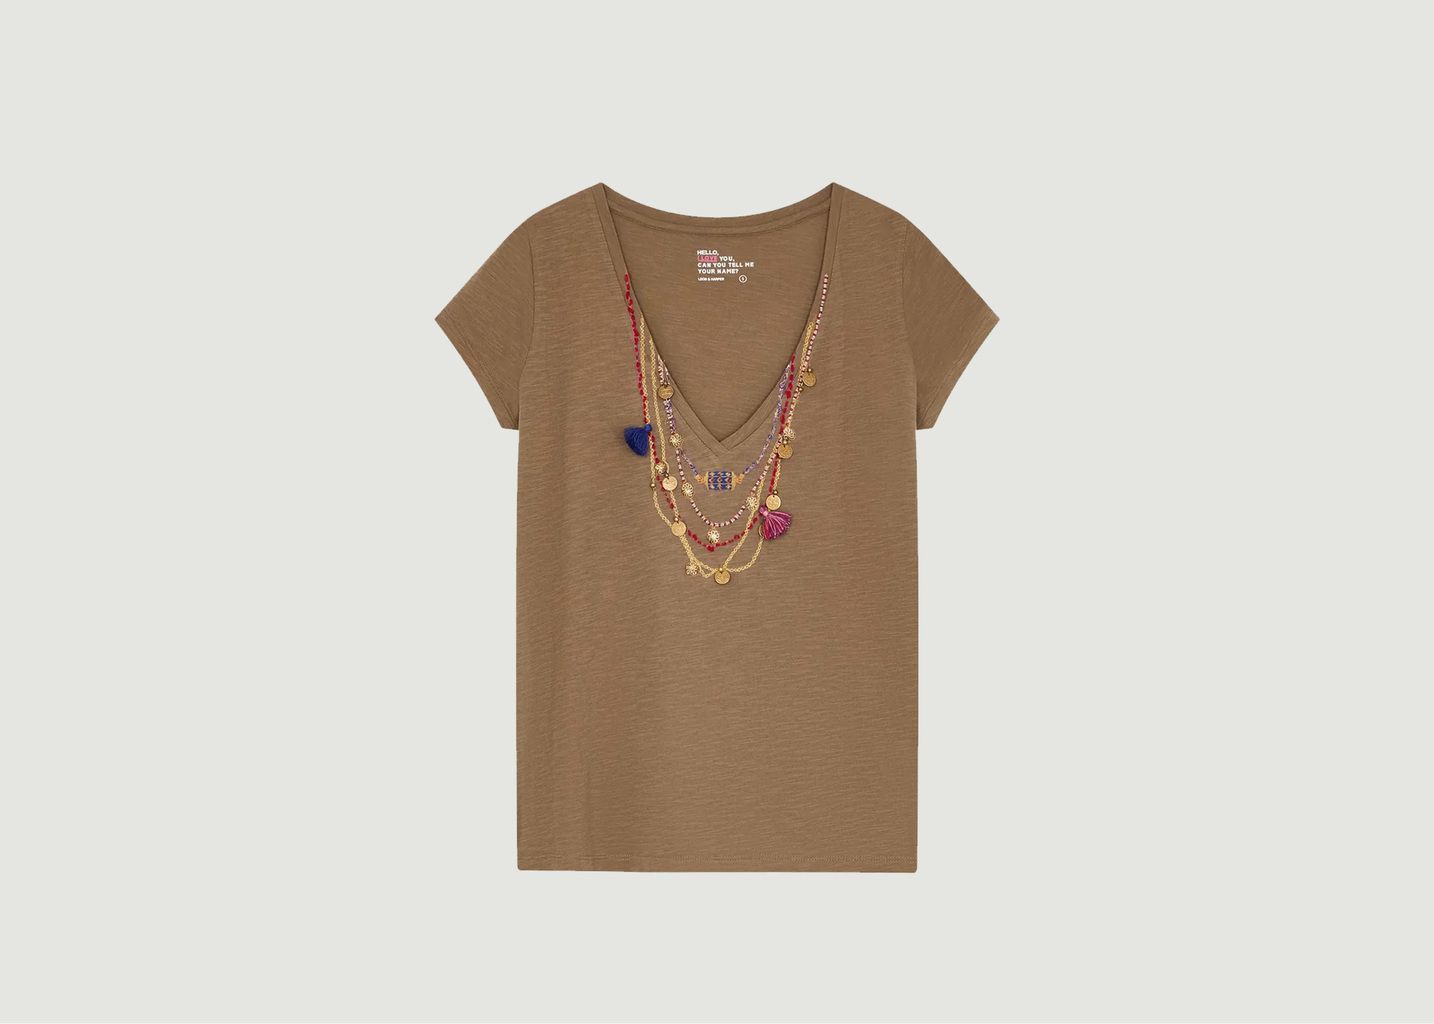 leon-and-harper-organic-cotton-t-shirt-with-necklace-pattern-tonton-medail